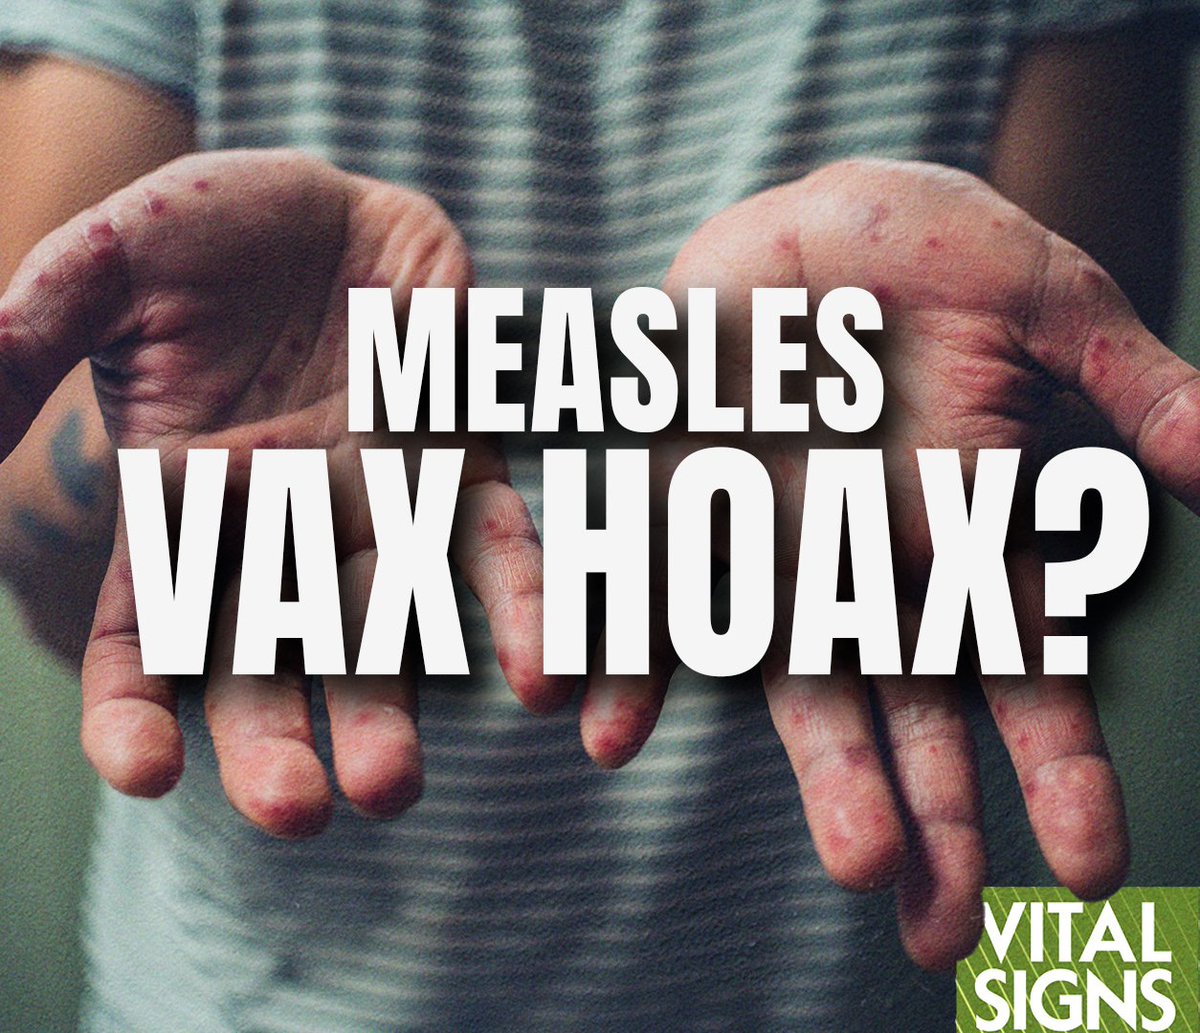 We’re told that vaccines eliminated measles, polio, etc… But was that really the case?